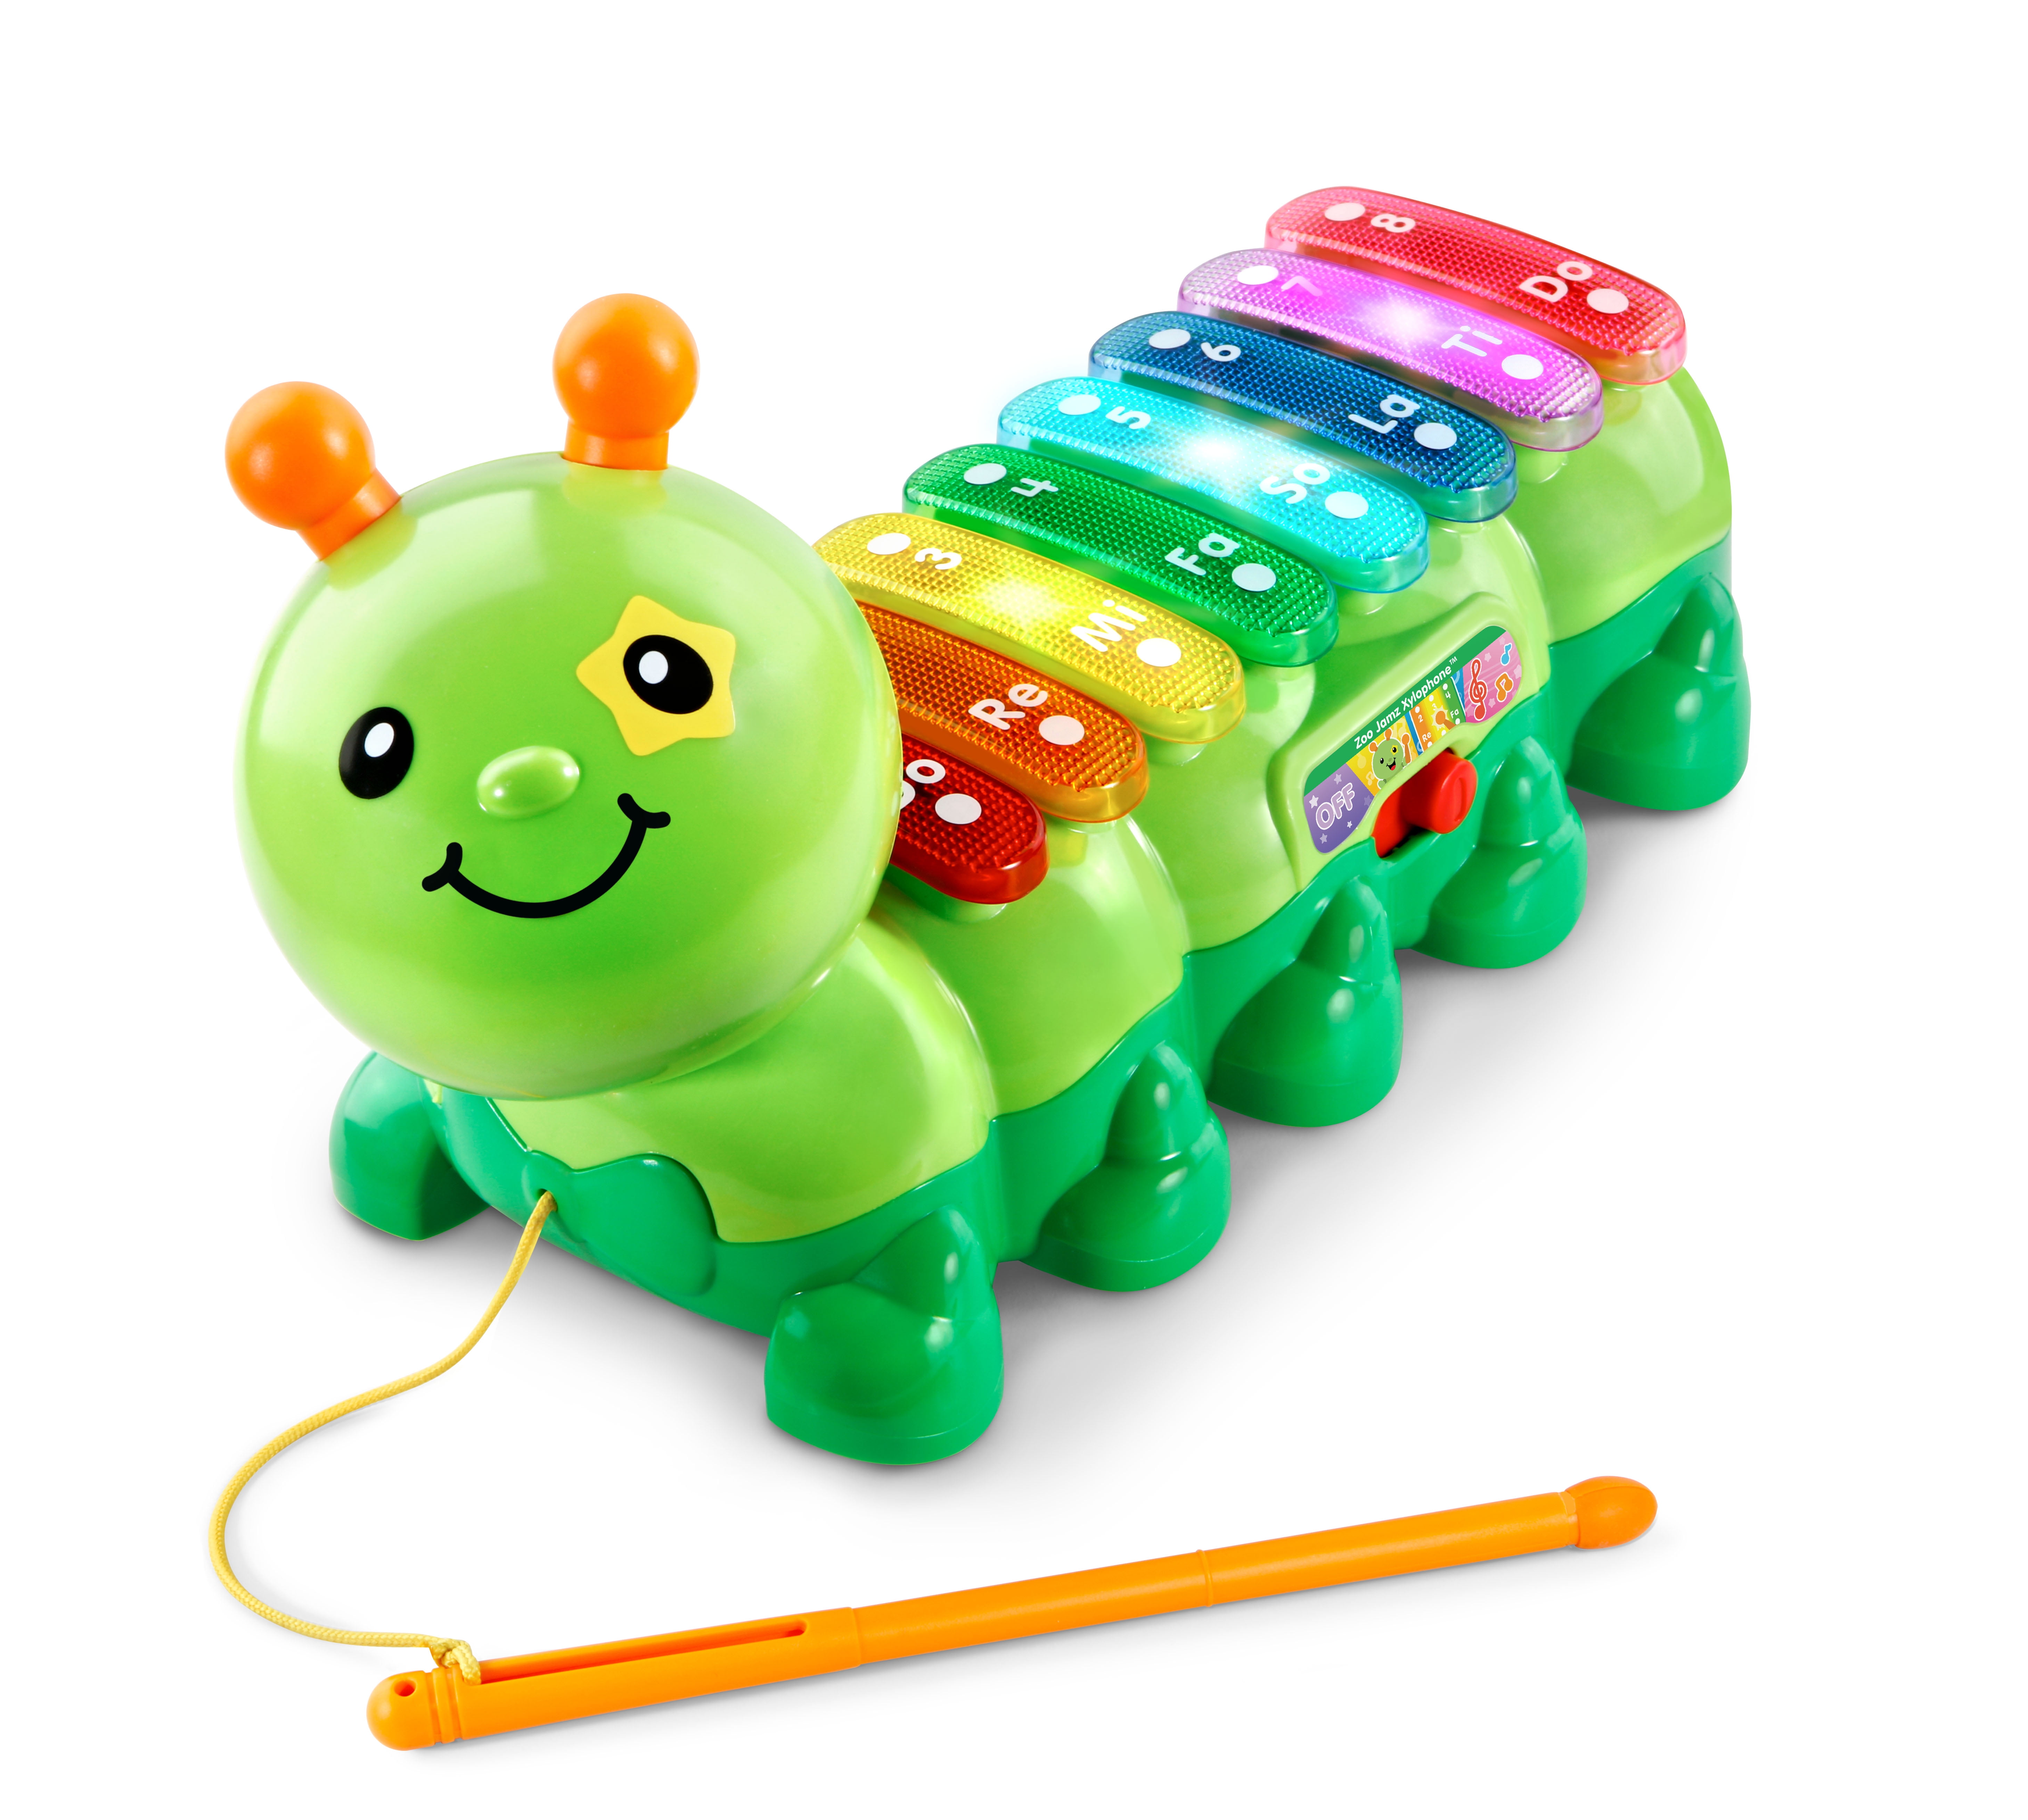 VTech Zoo Jamz Xylophone Caterpillar, Musical Teaching Toy for Infants